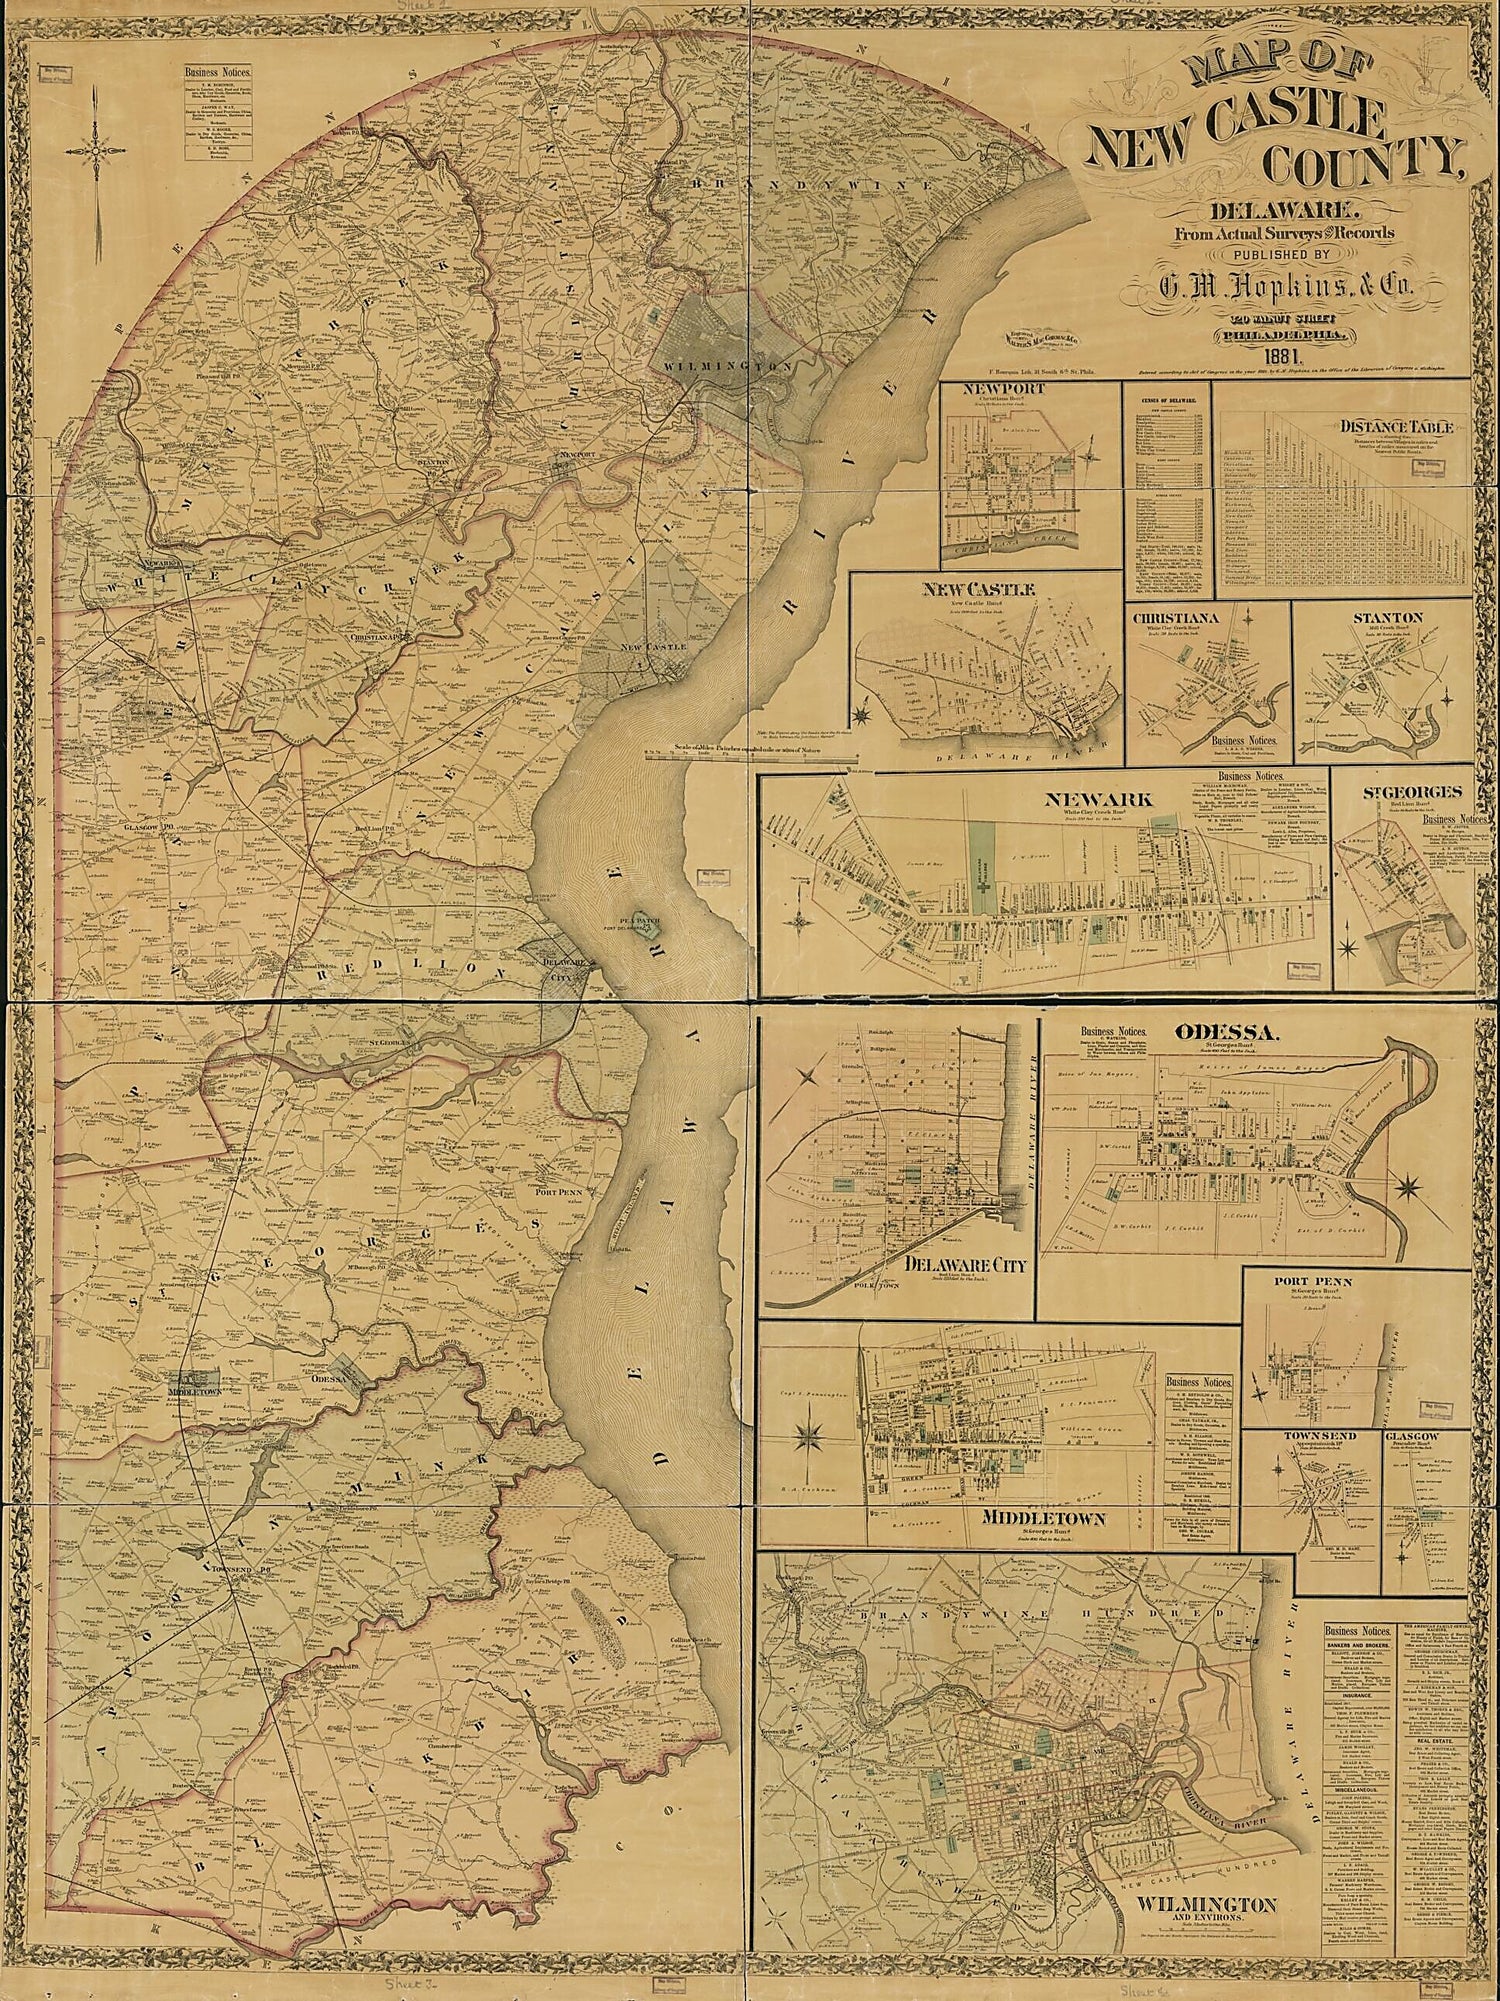 This old map of Map of New Castle County, Delaware : from Actual Surveys &amp; Recotds from 1881 was created by F. (Frederick) Bourquin,  G.M. Hopkins &amp; Co, Griffith Morgan Hopkins,  Walter S. Mac Cormac &amp; Co in 1881